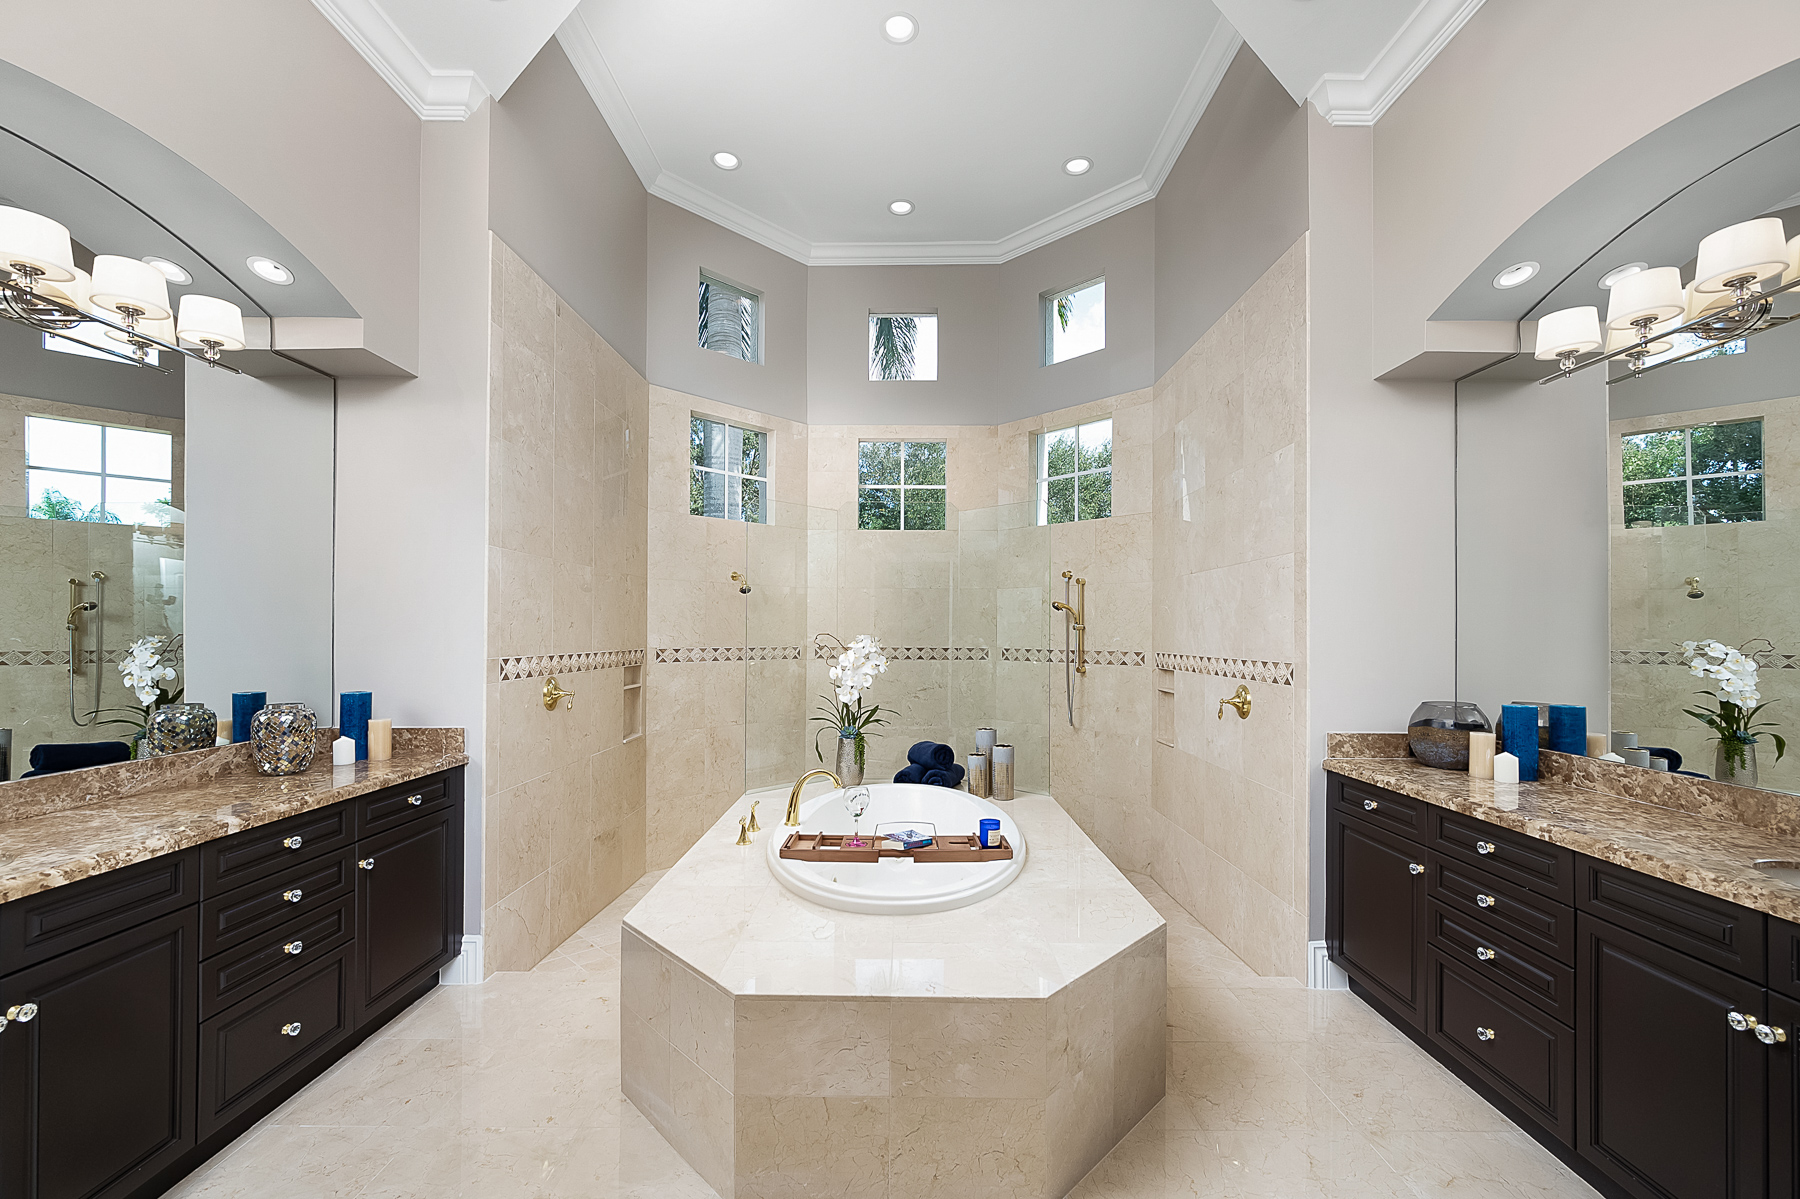 Master suite bath includes a large walk-through shower with honed stone tiles on the walls and floors as well as glamorous soaking tub to take a relaxing bubble bath in